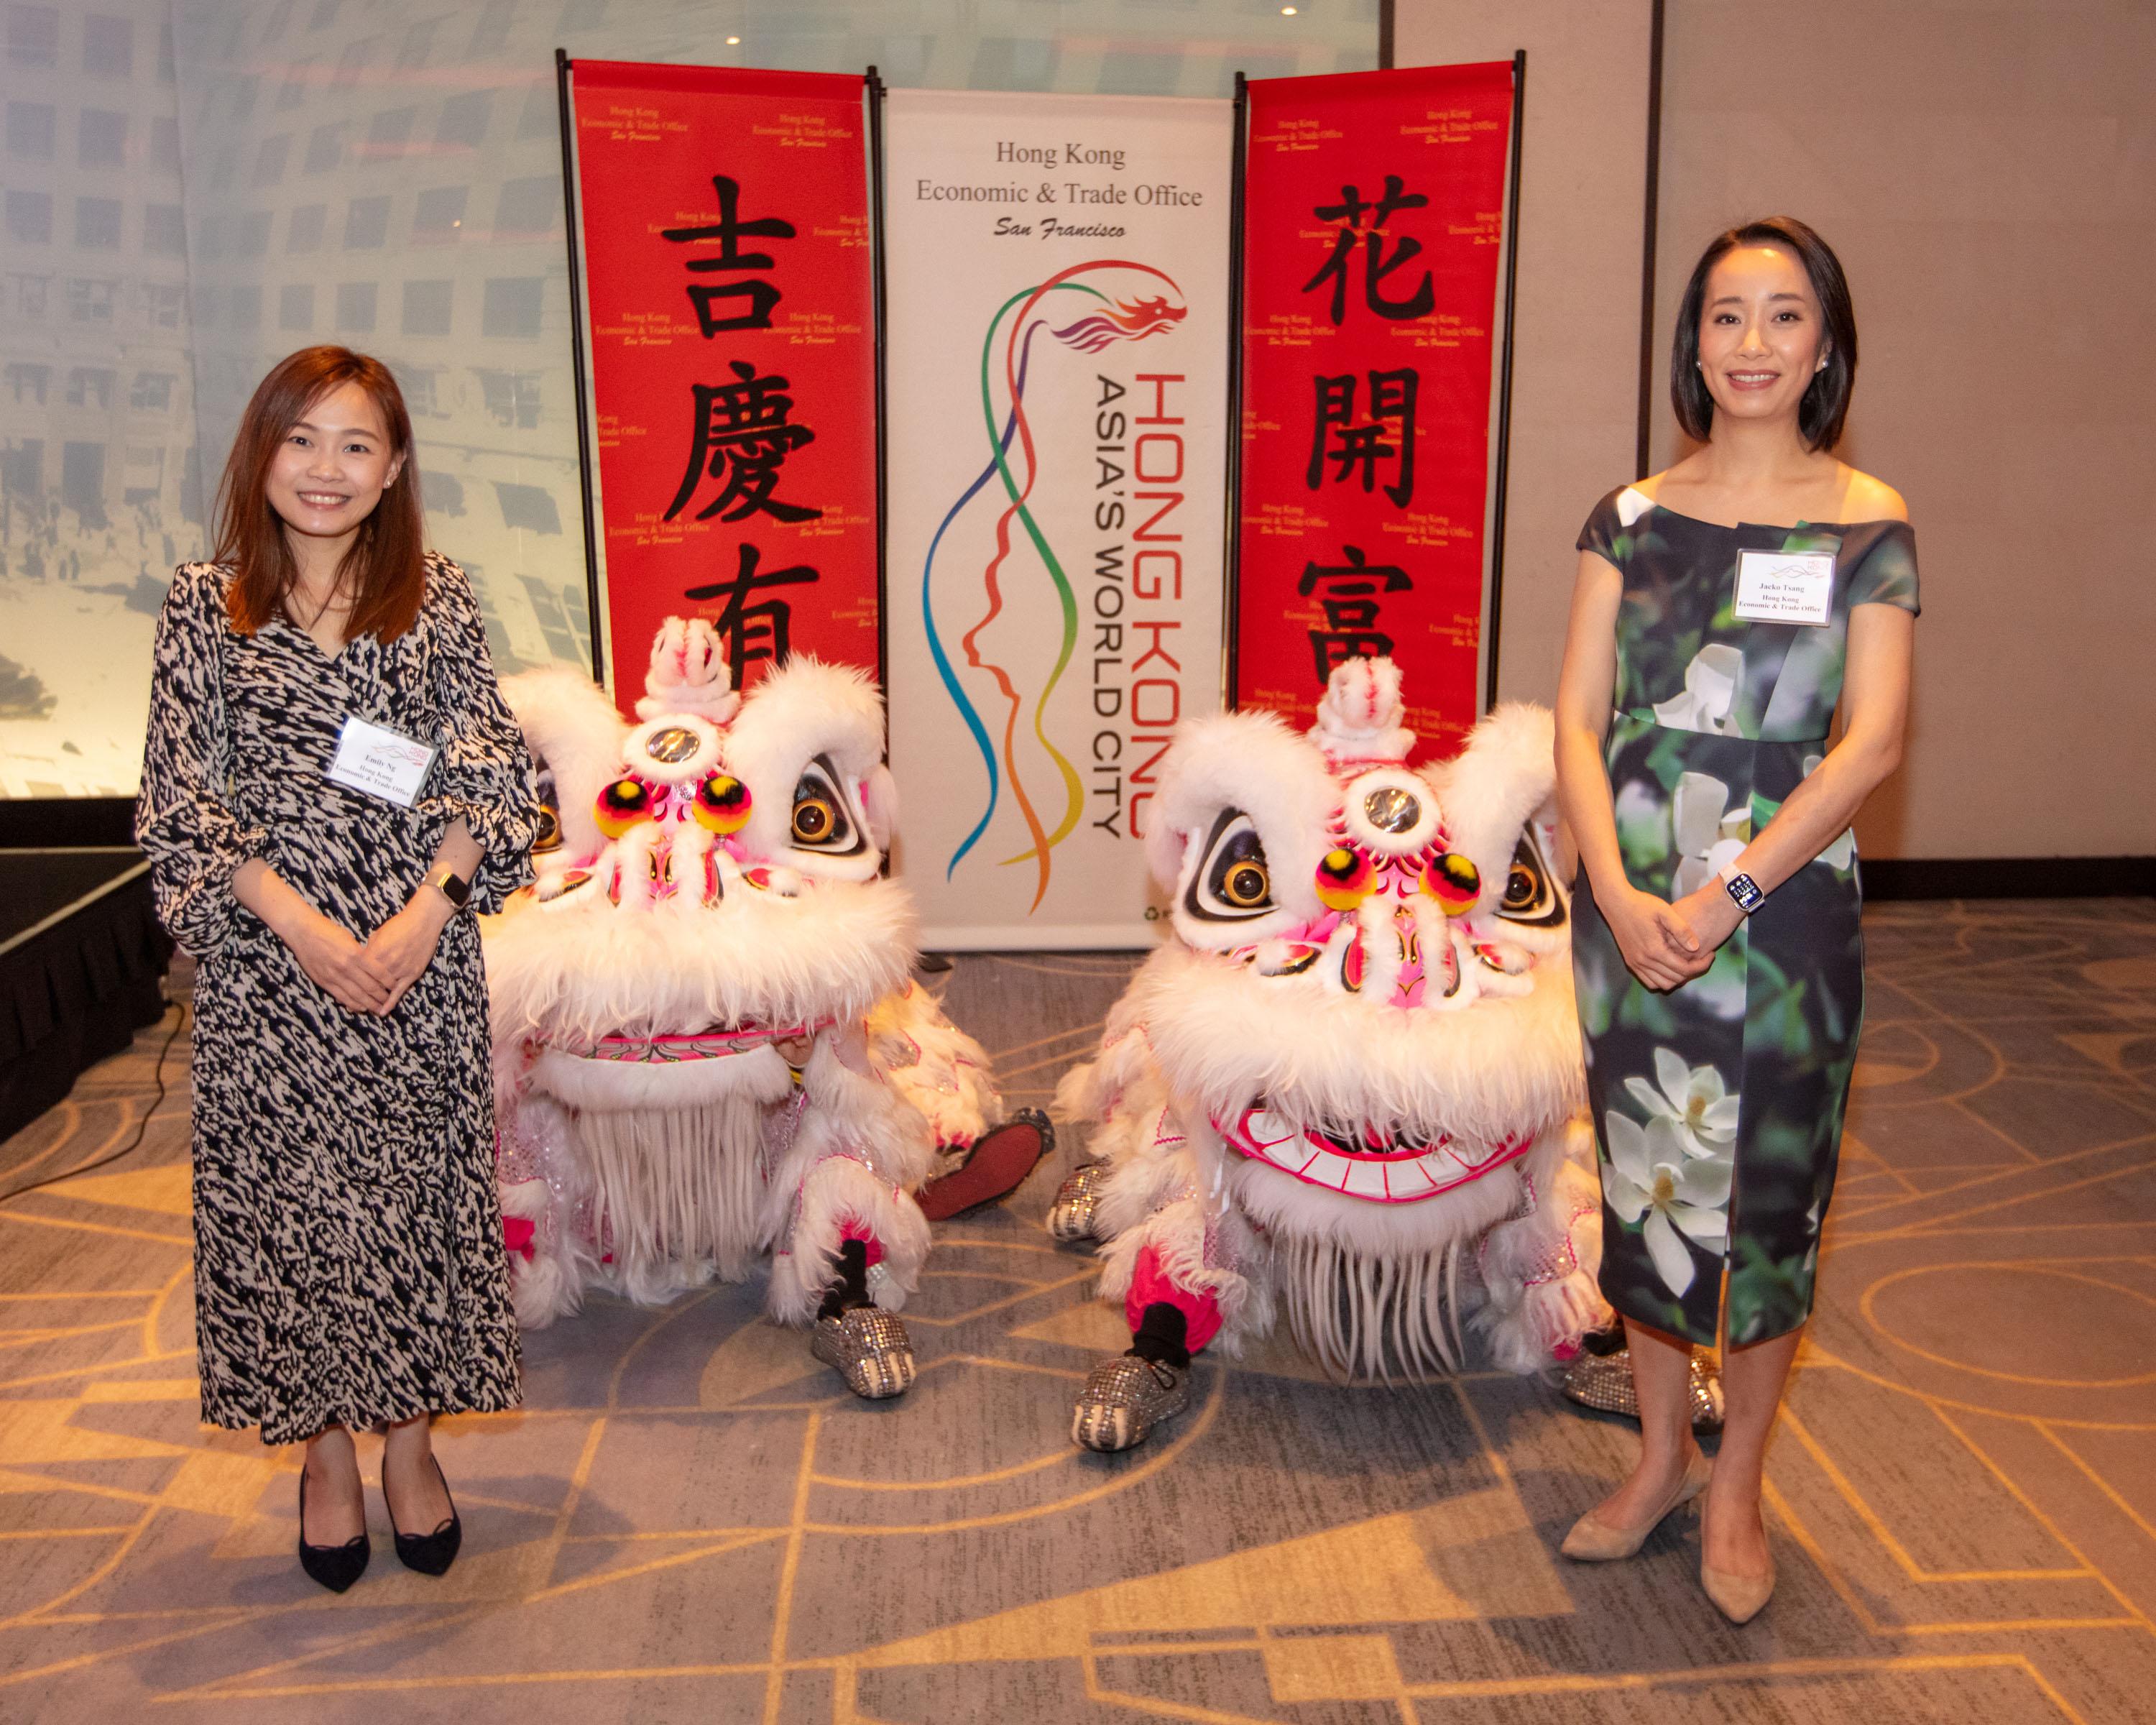 The Director of the Hong Kong Economic and Trade Office in San Francisco (HKETO San Francisco), Ms Jacko Tsang (right), and the Deputy Director of the HKETO San Francisco, Miss  Emily Ng (left), conducted  the eye-dotting ceremony at the spring reception in Houston, Texas, on March 1 (Houston time).